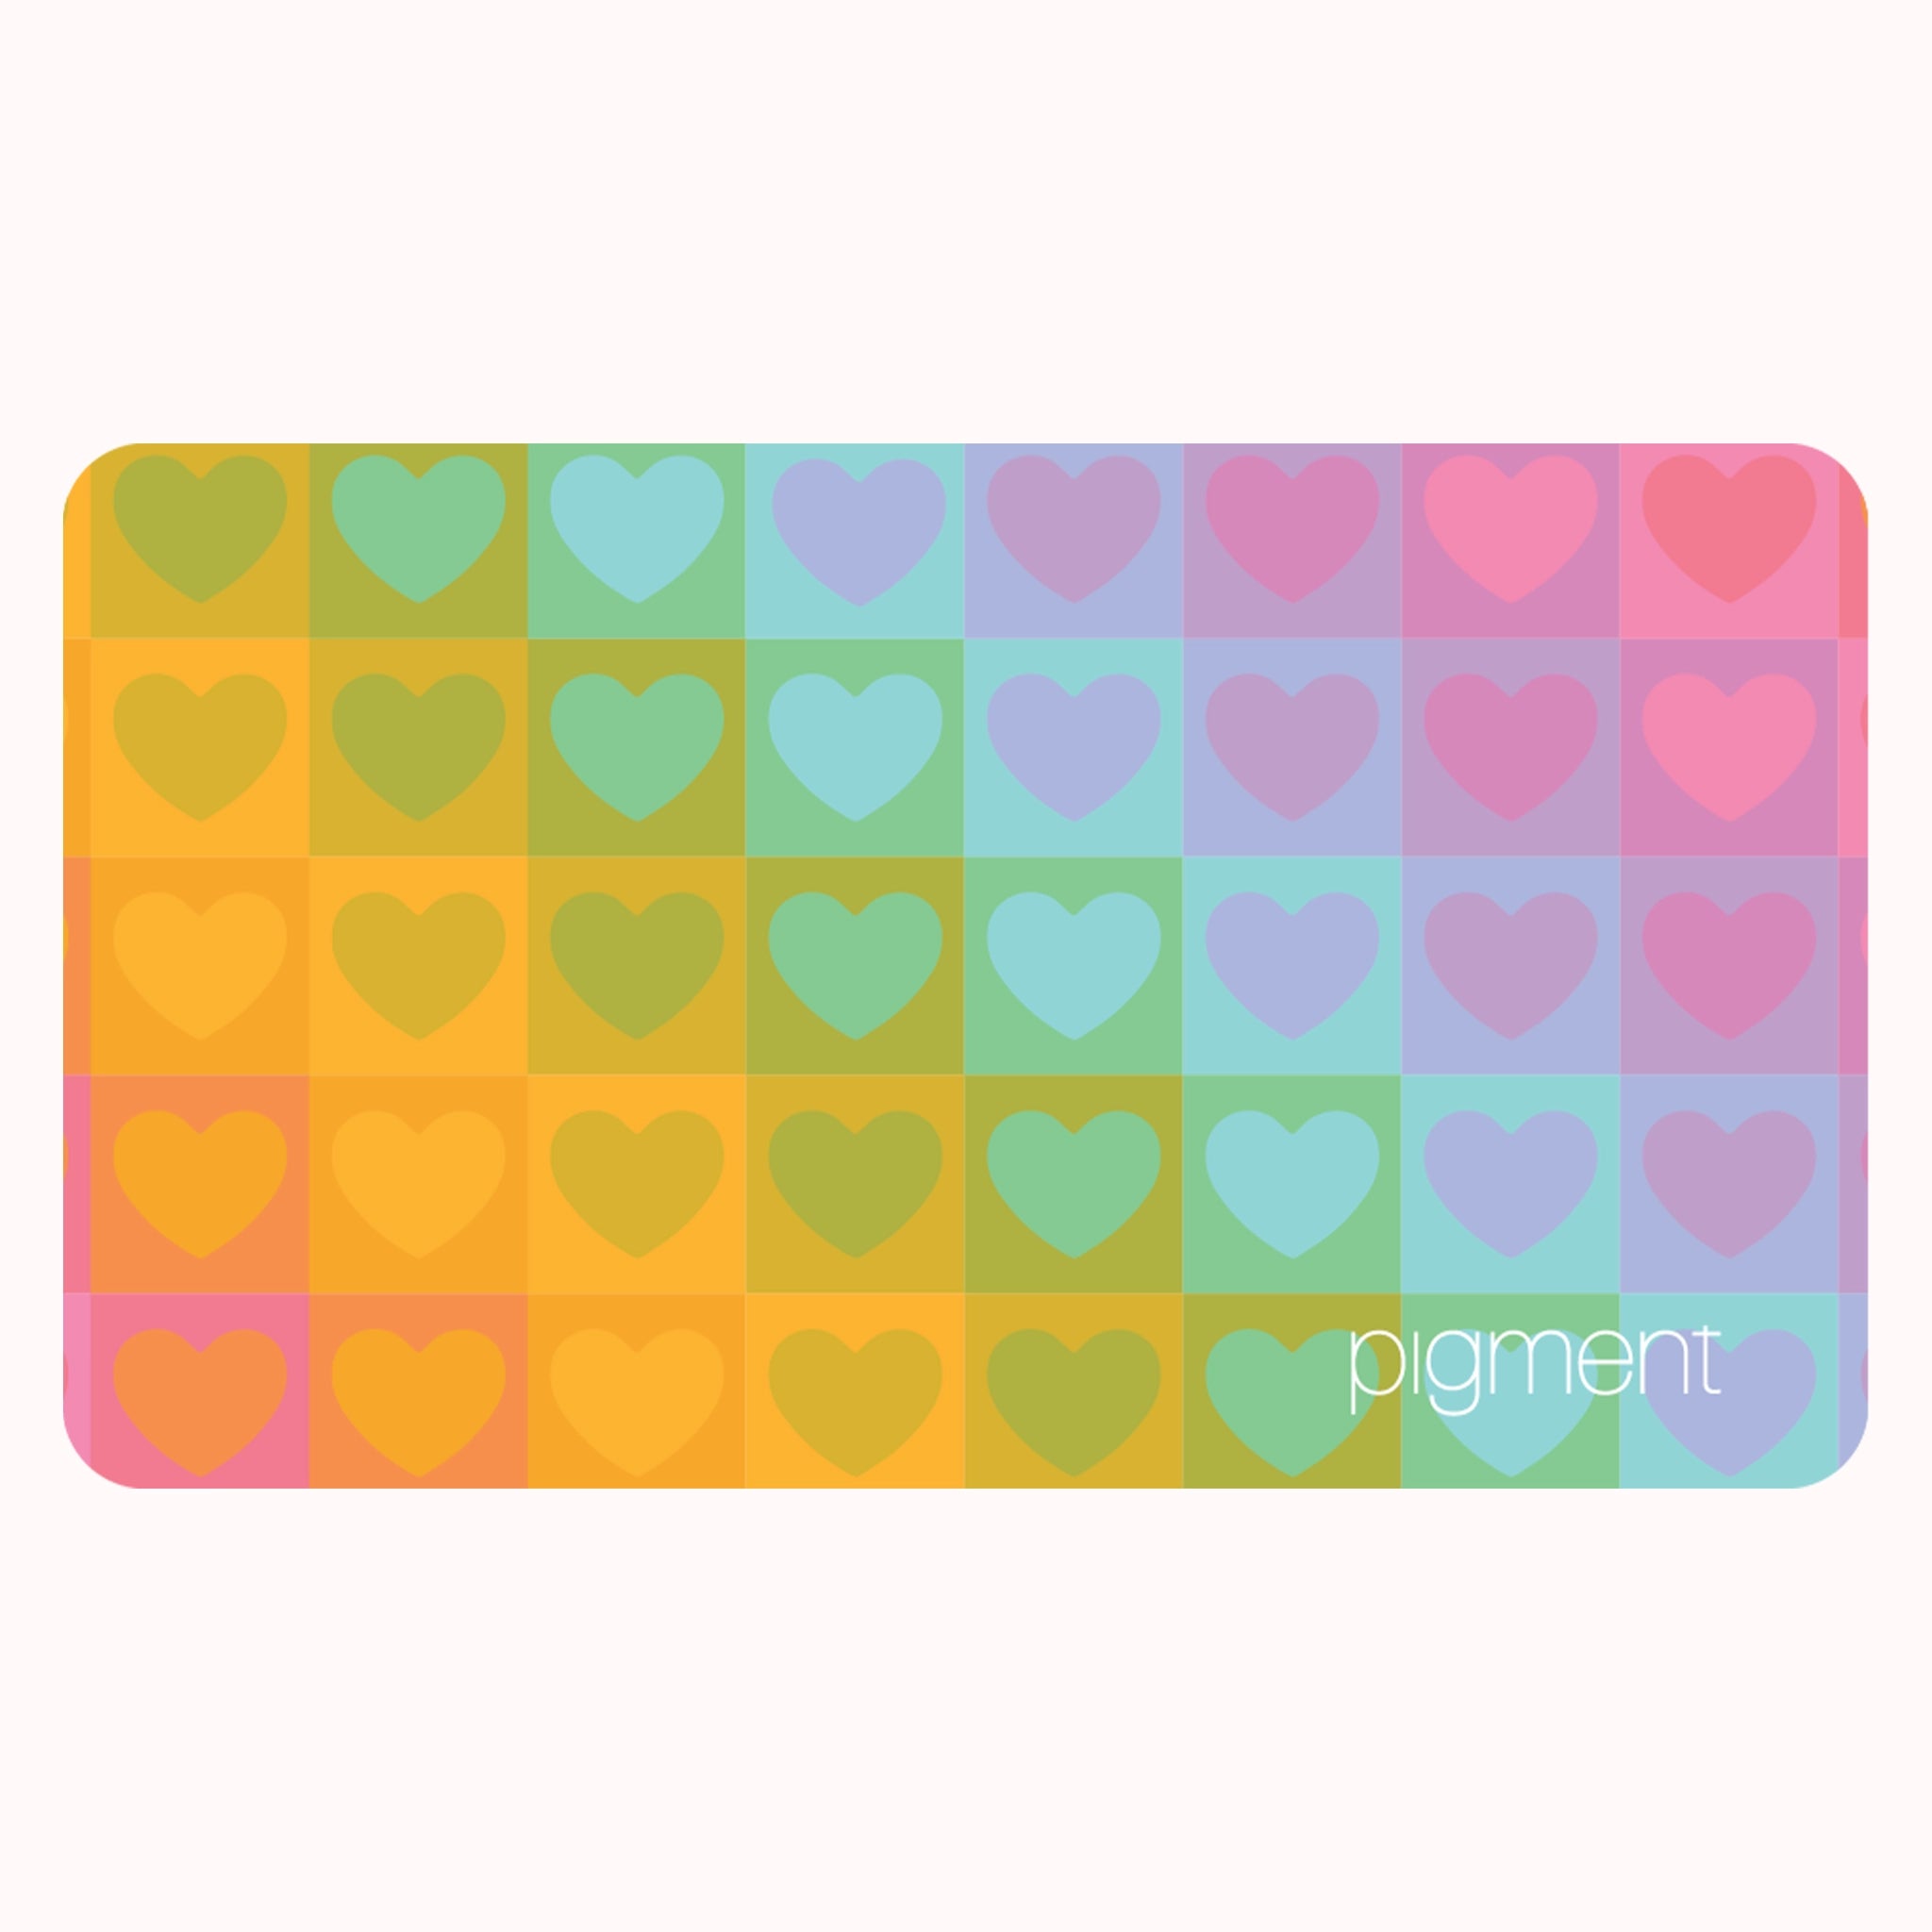 On a white background is a multicolored rainbow heart gift card with white text in the bottom right corner that reads, "Pigment".